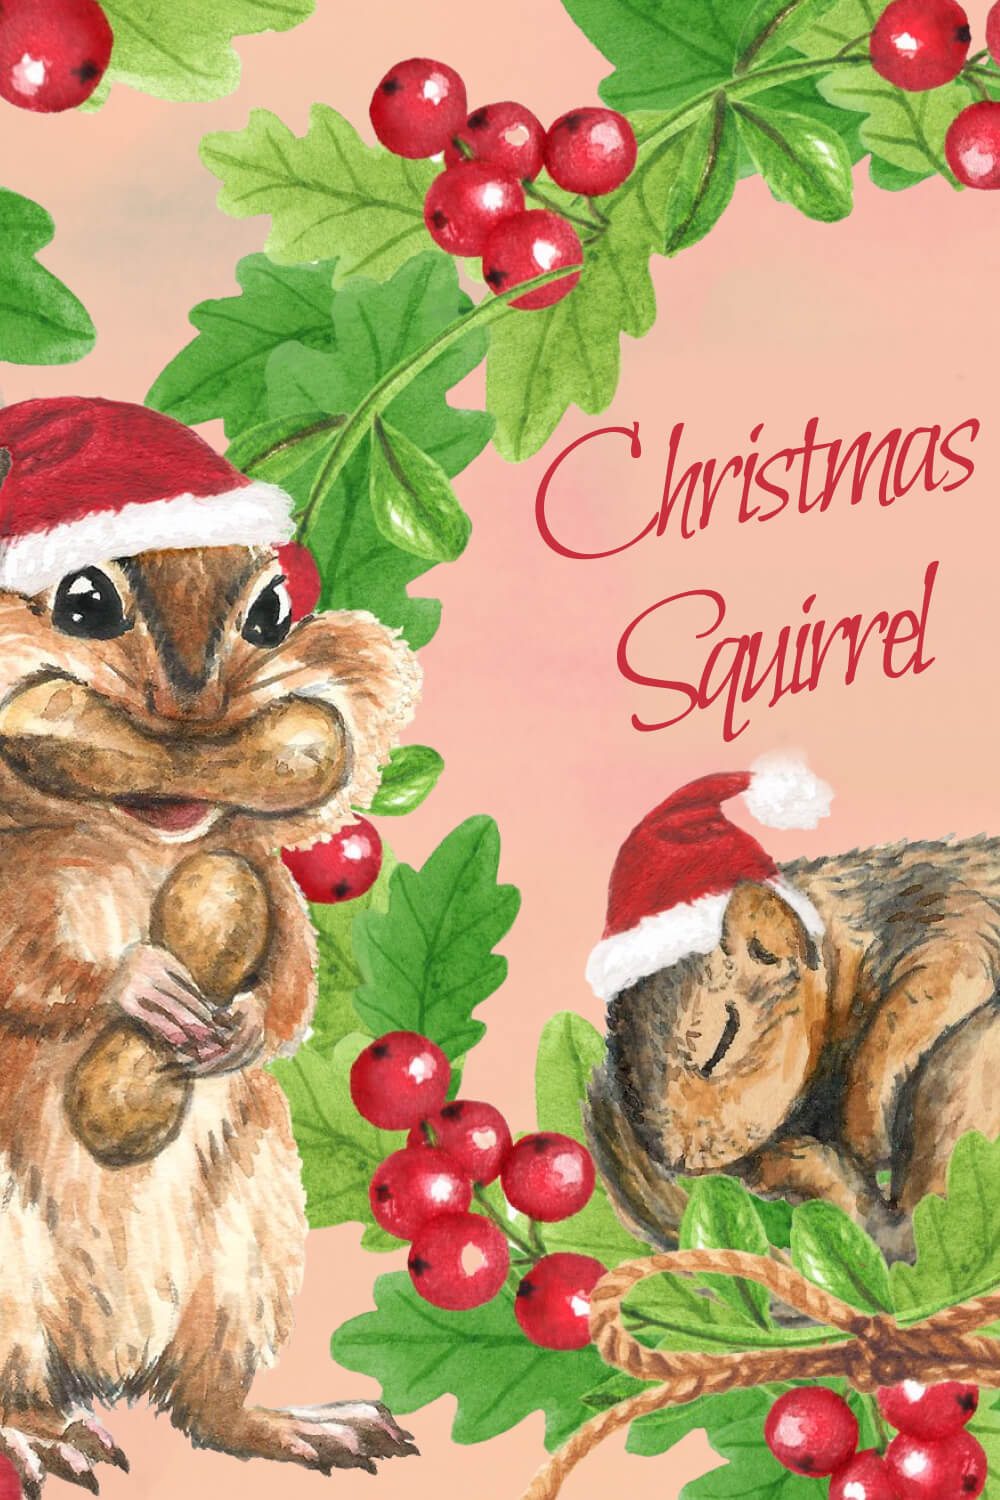 Two brown Christmas squirrels painted on a pink Christmas background.